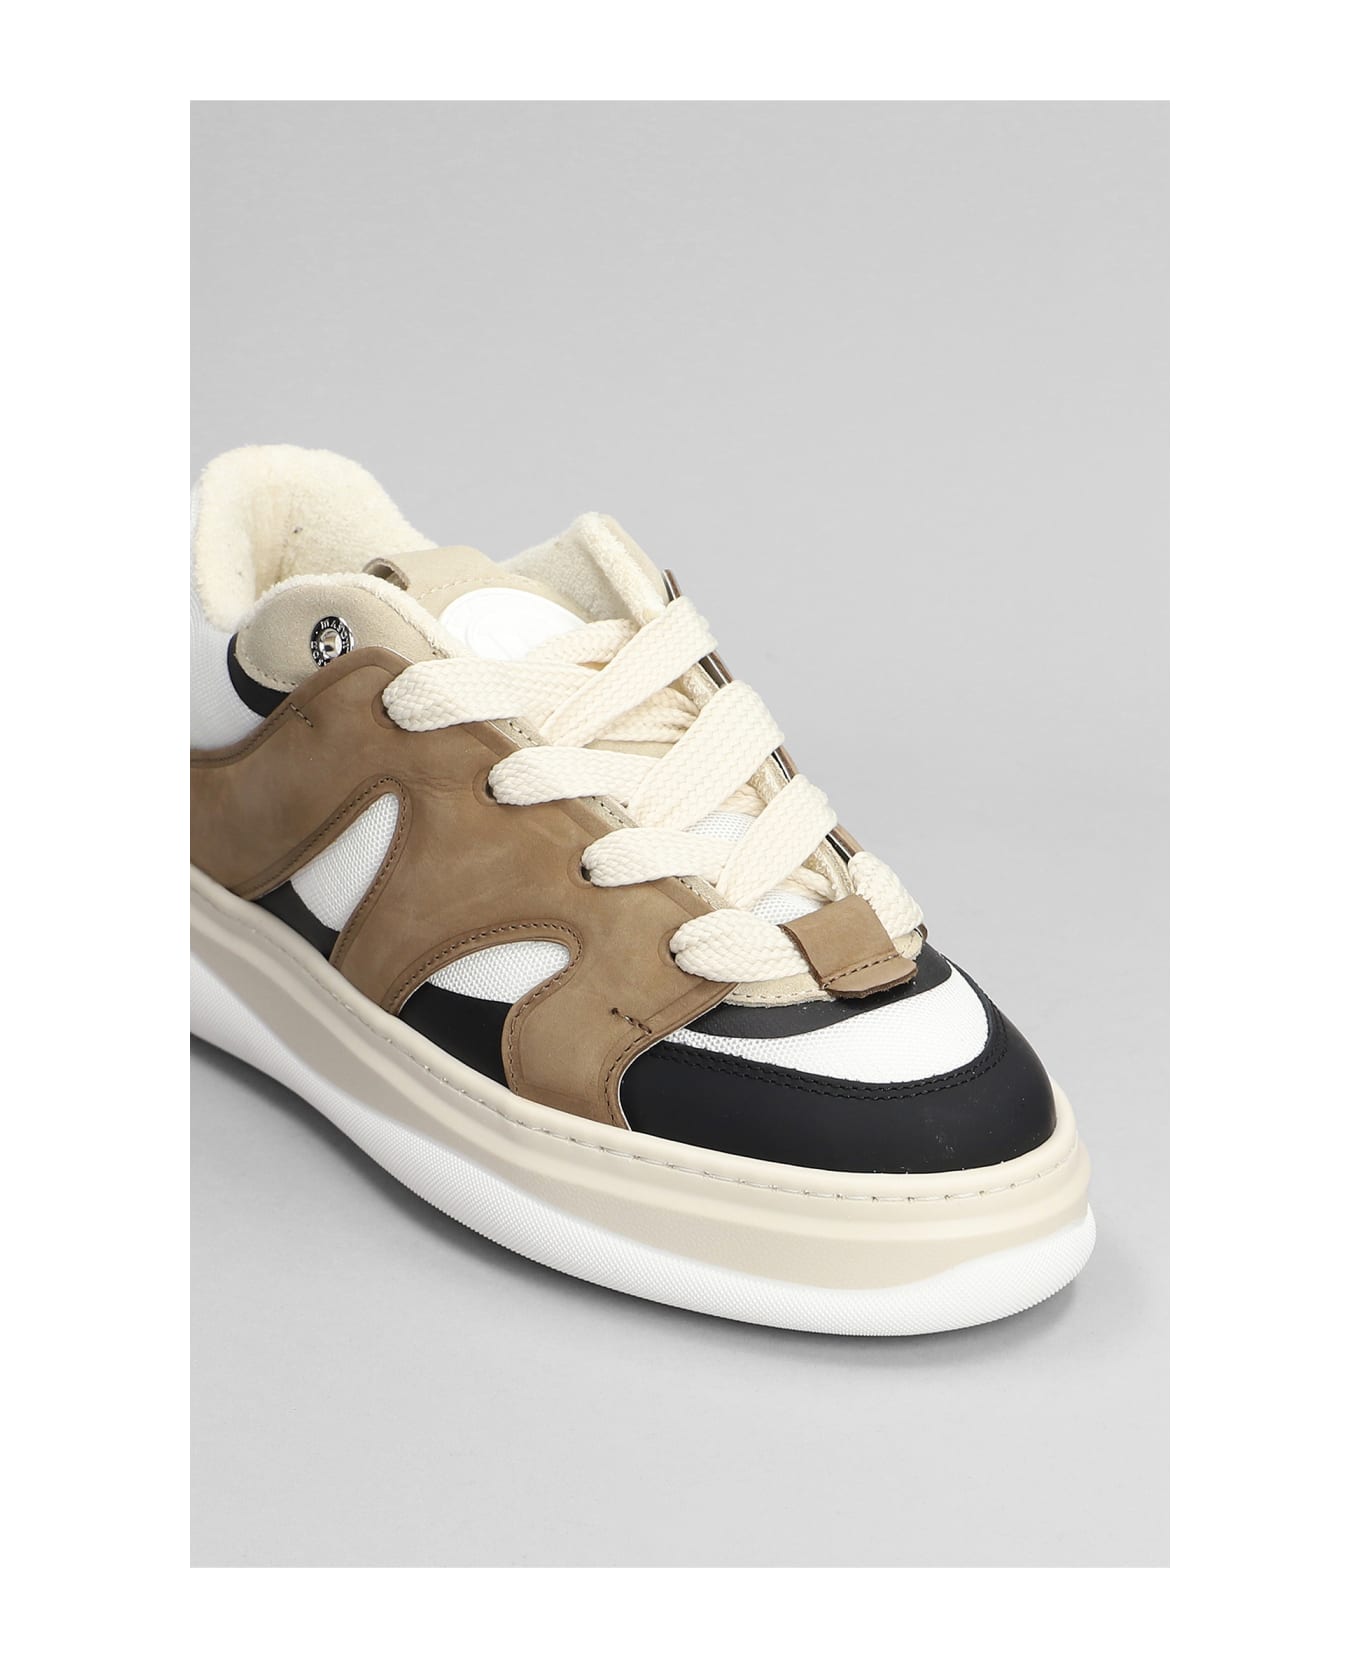 Mason Garments Venice Sneakers In Brown Suede And Fabric - brown